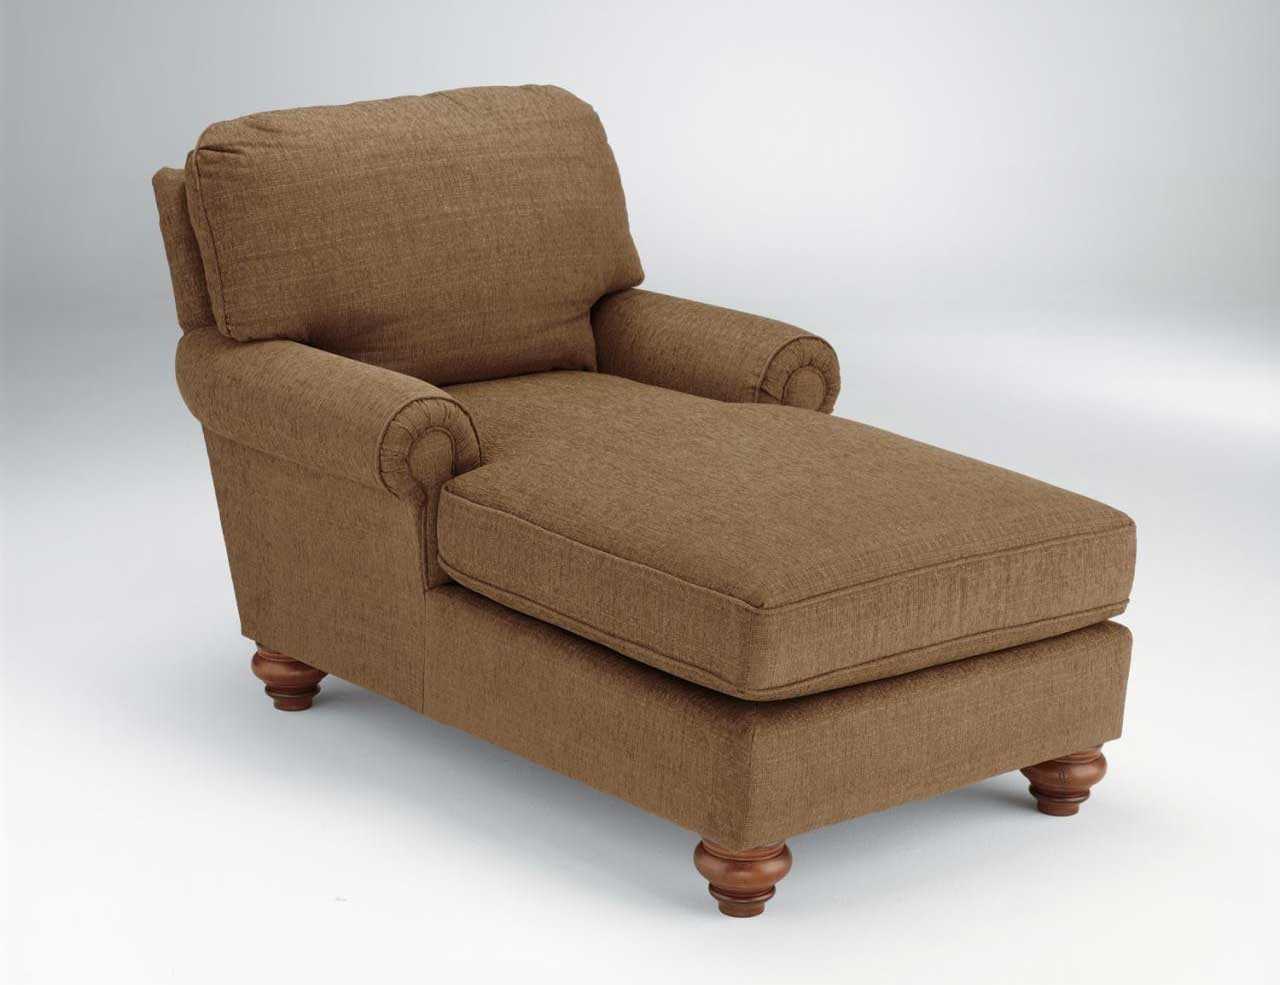 Multifunctional brown bed and accent chair